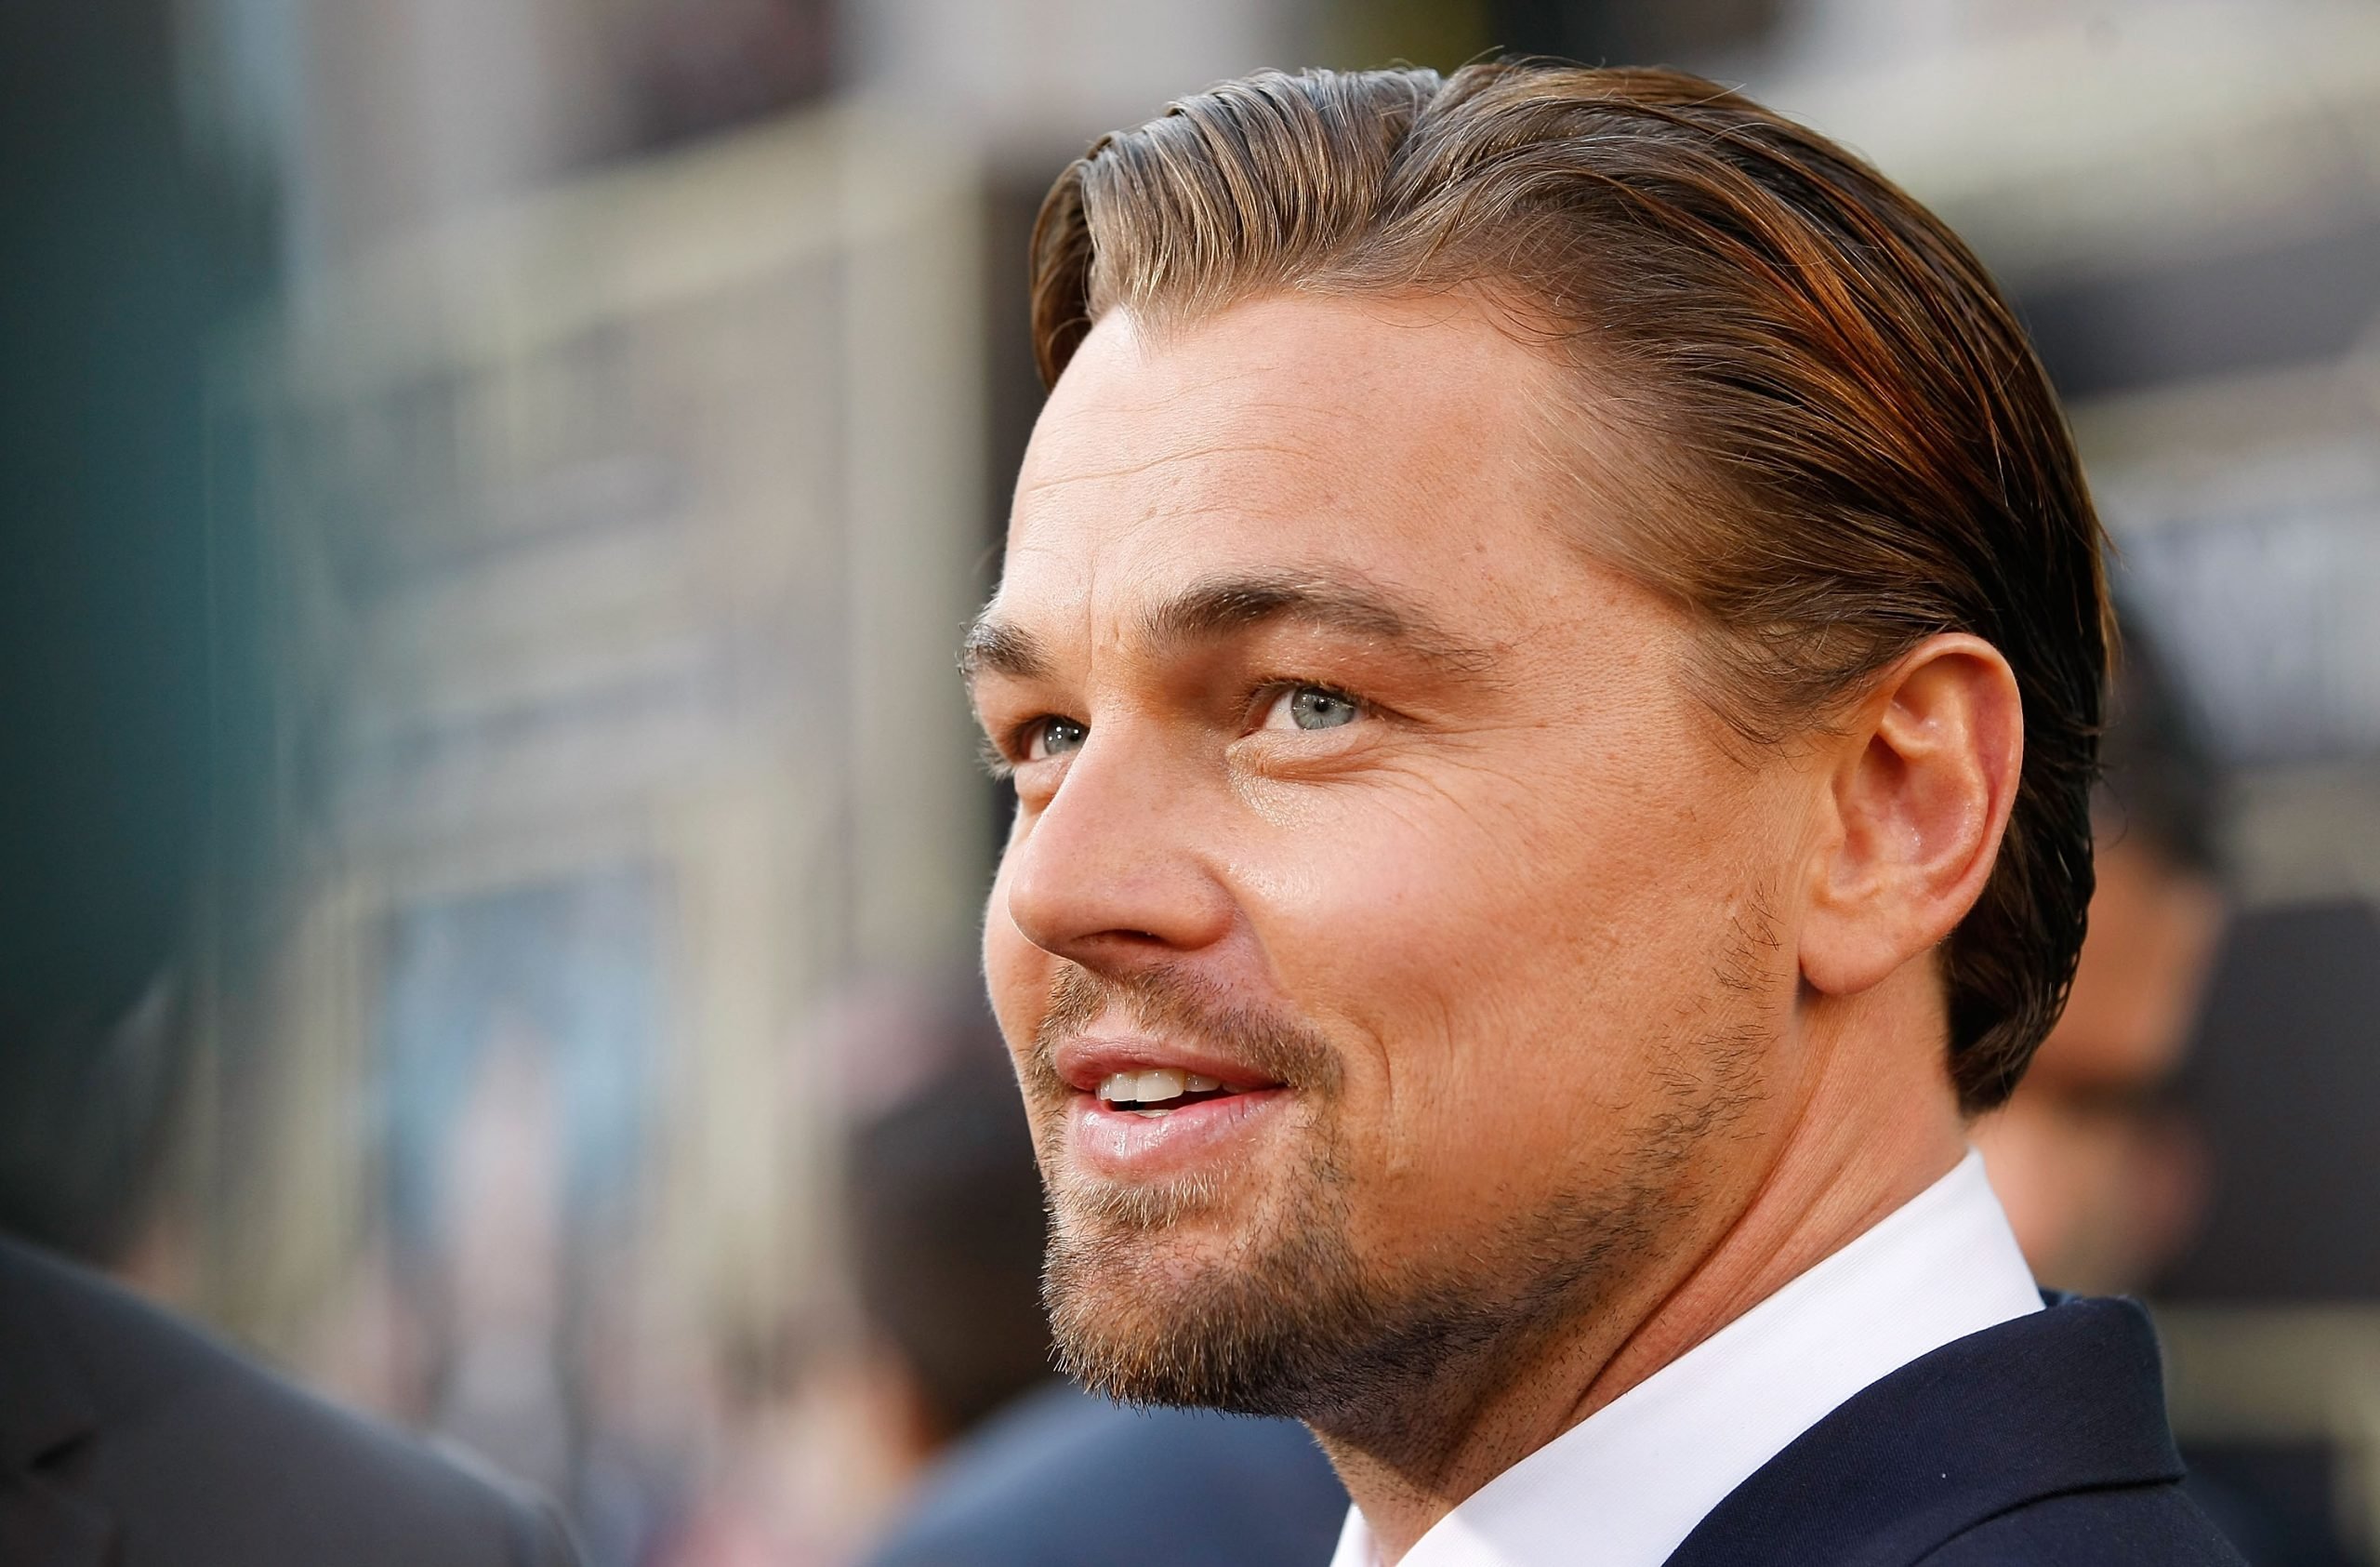 Leonardo DiCaprio, who turned down the role in Hocus Pocus, smiles at the Great Gatsby premiere